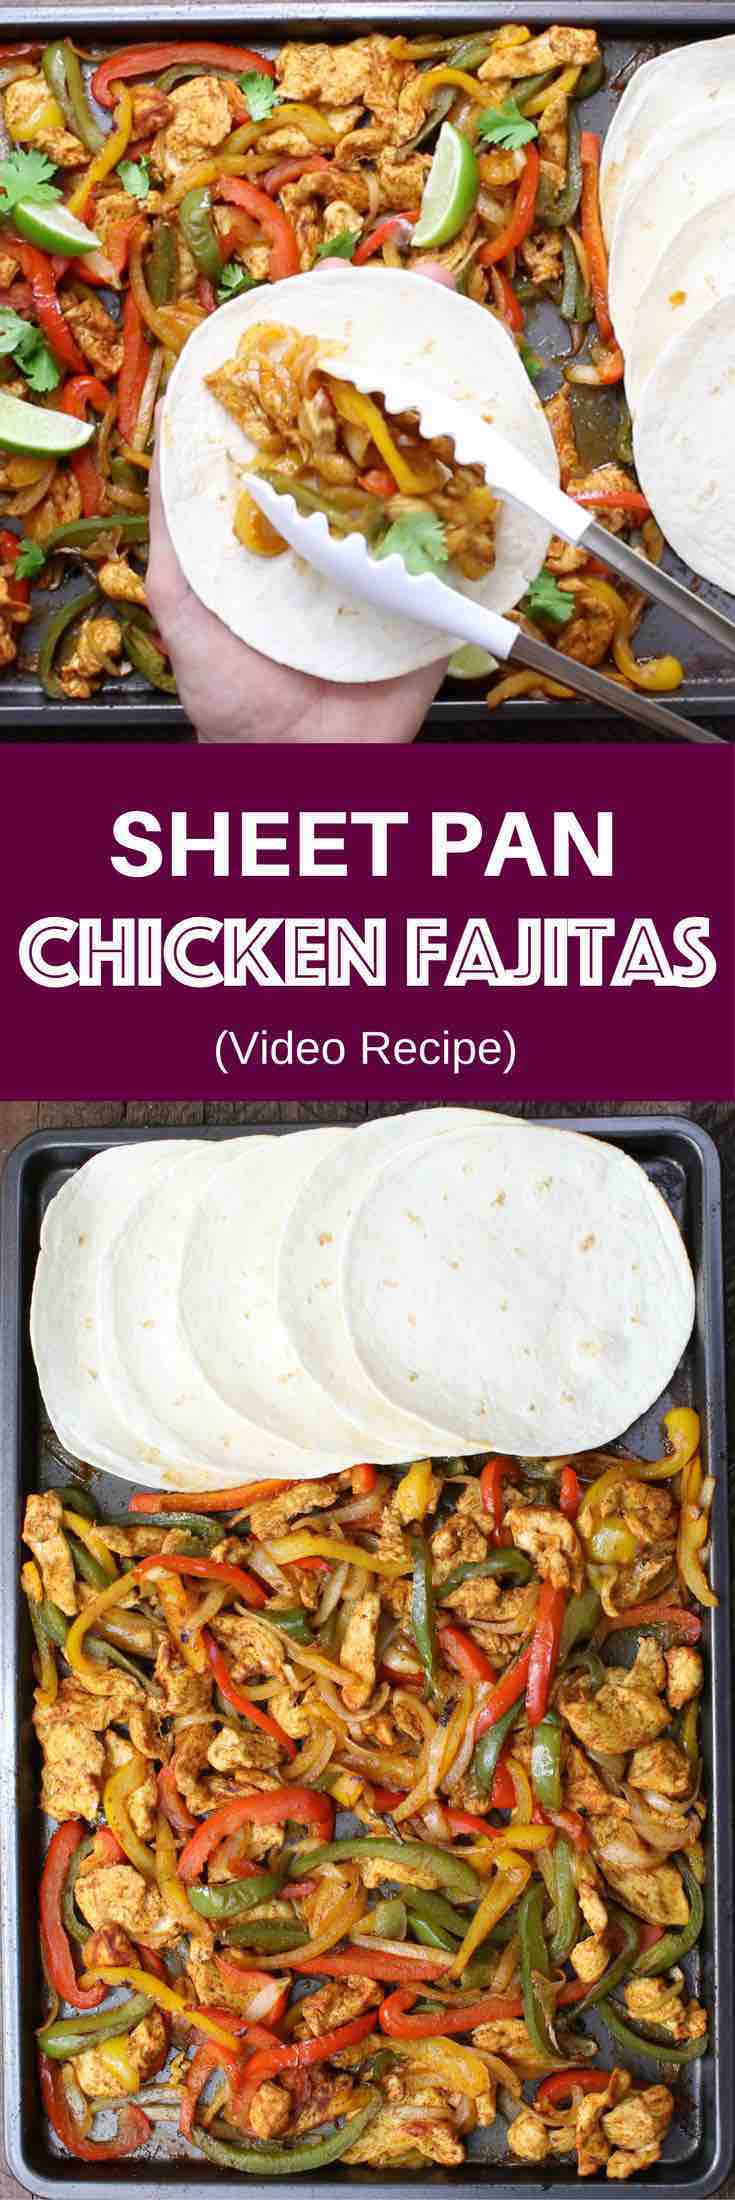 Sheet Pan Chicken Fajitas are an easy one pan meal cooked on a baking sheet in the oven. Chicken breasts are combined with sliced onions, bell peppers and fajita seasonings to make a healthy meal served with hot tortillas. Ready in 30 minutes! #fajitas #chickenfajitas